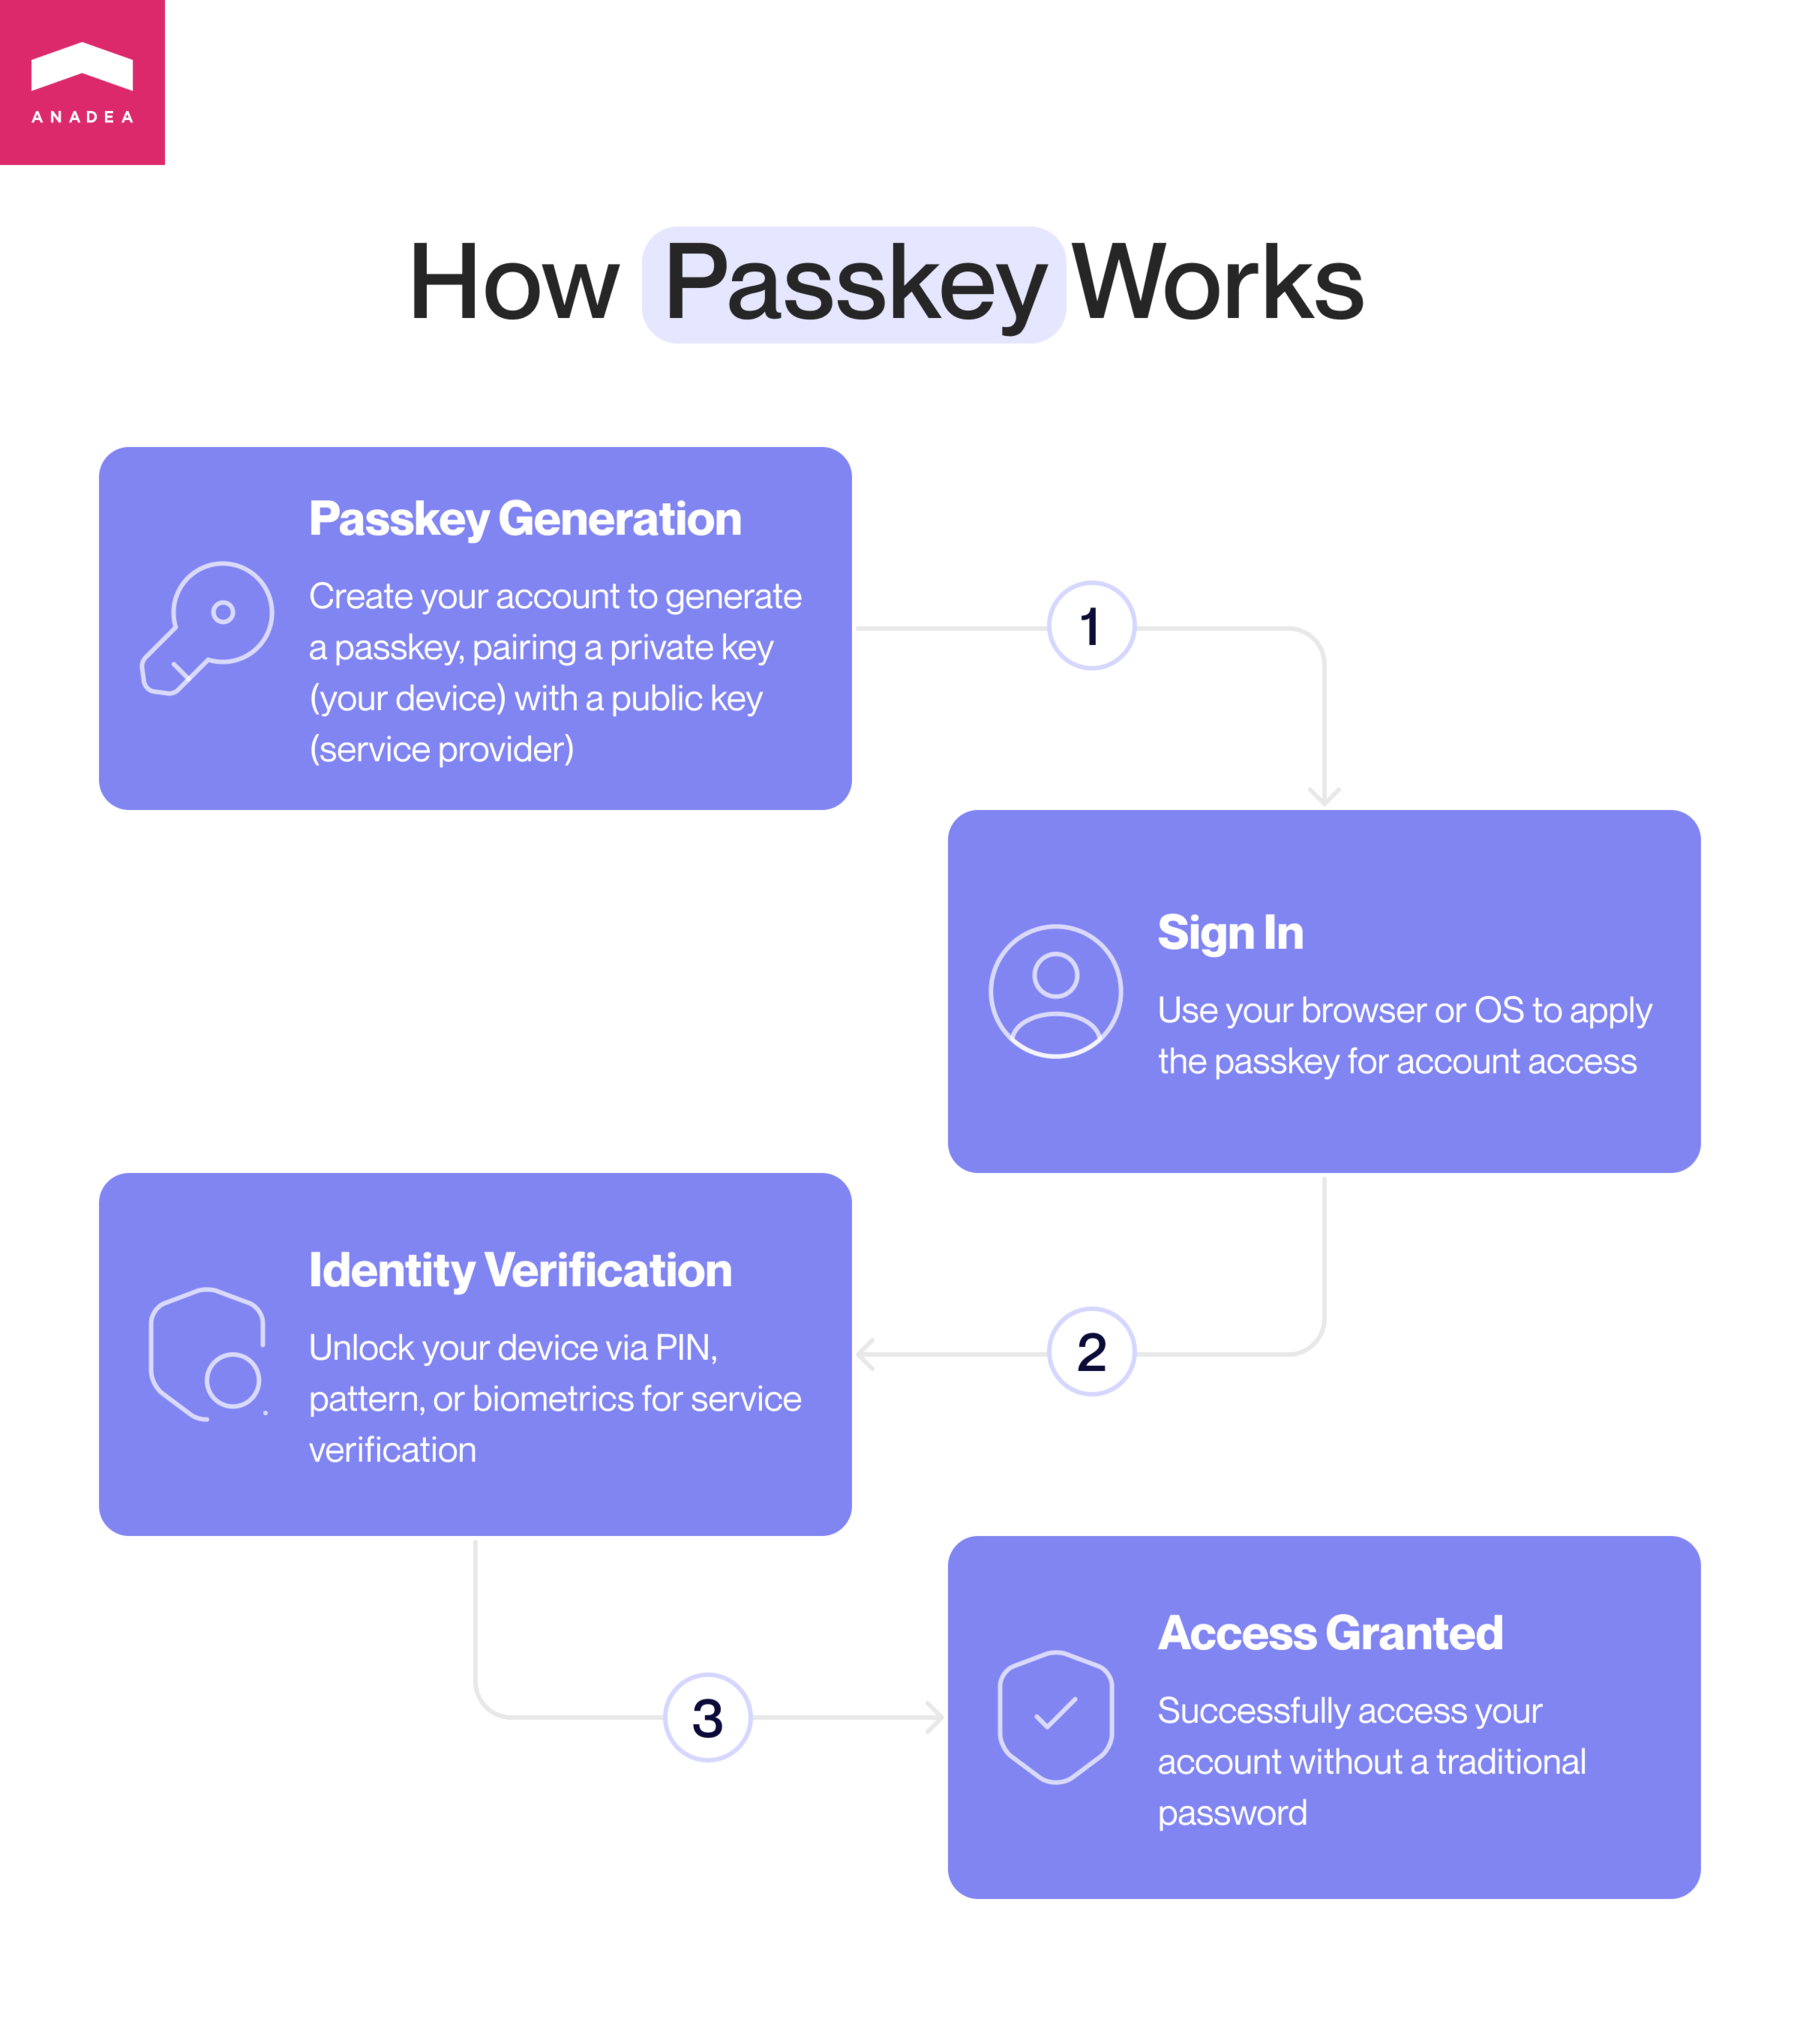 How passkey works step by step